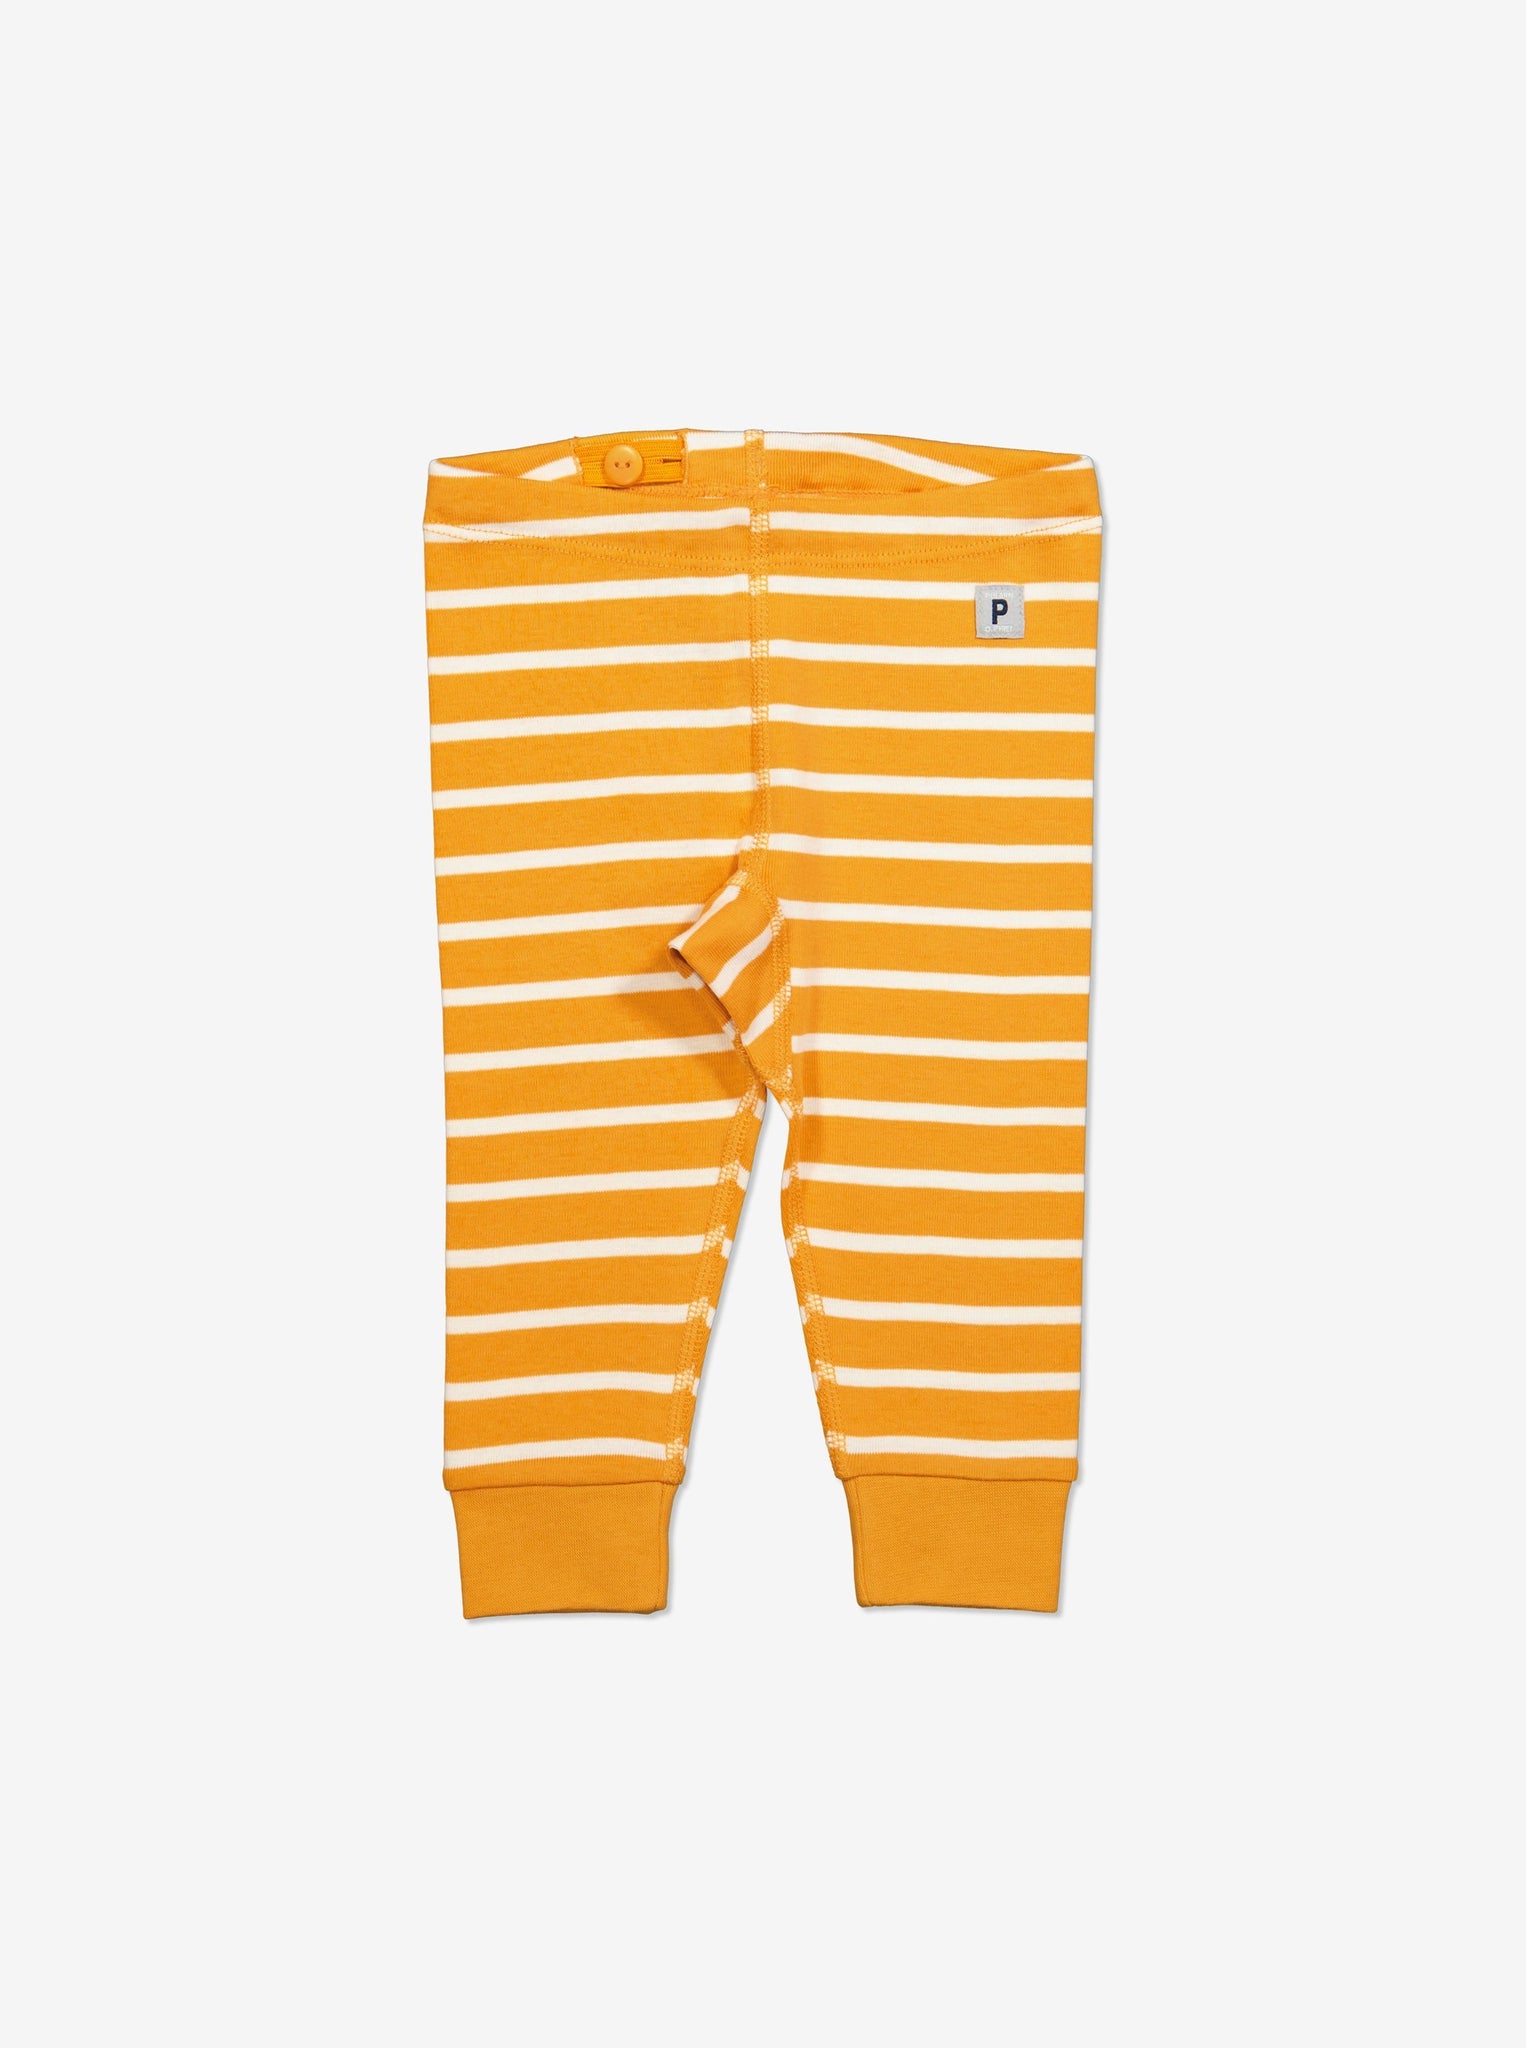  Organic Stripd Yellow Baby Leggings from Polarn O. Pyret Kidswear. Made with 100% organic cotton.